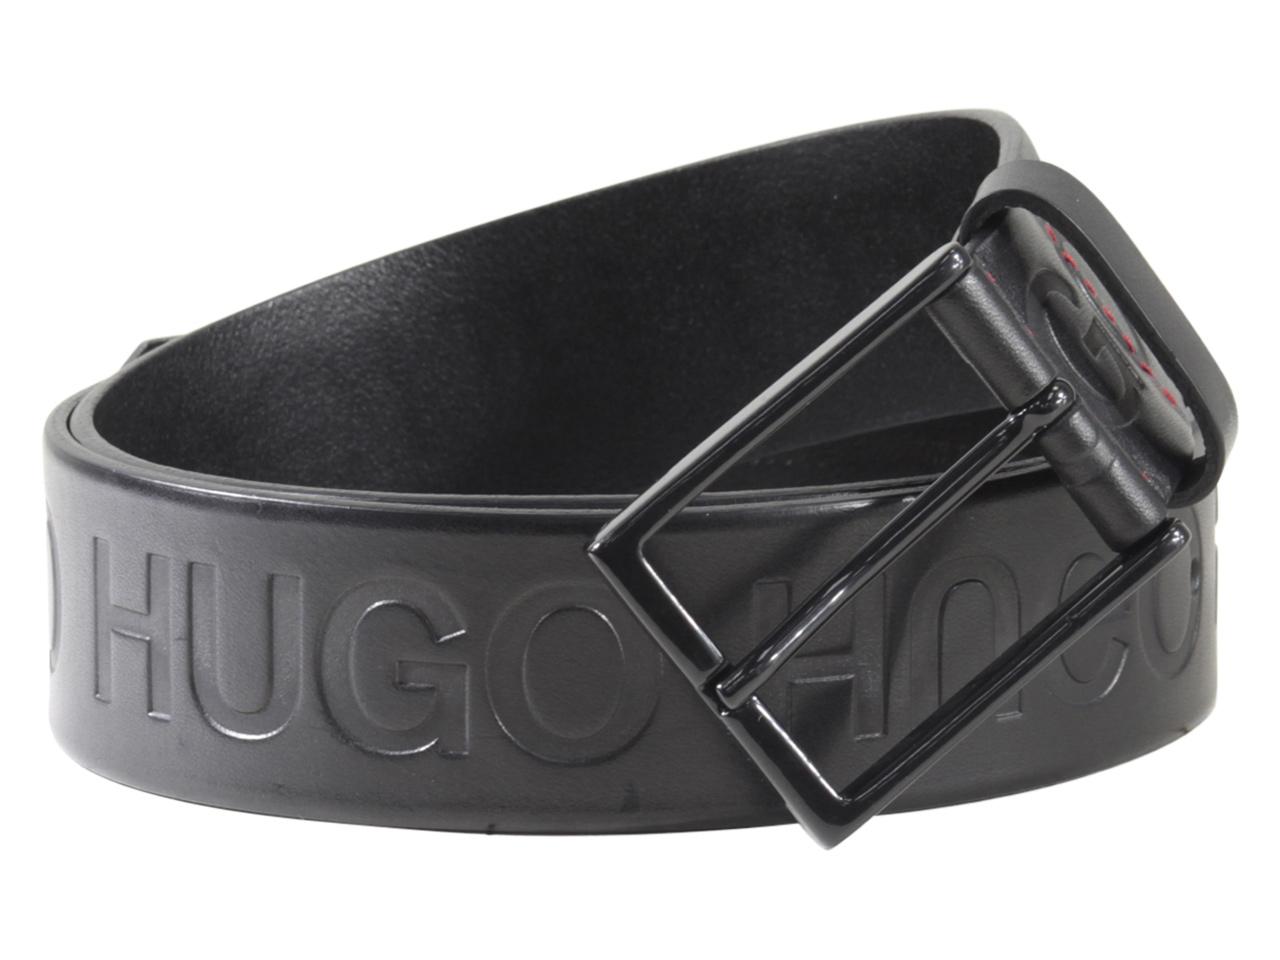 HUGO - Grained-leather belt with logo buckle